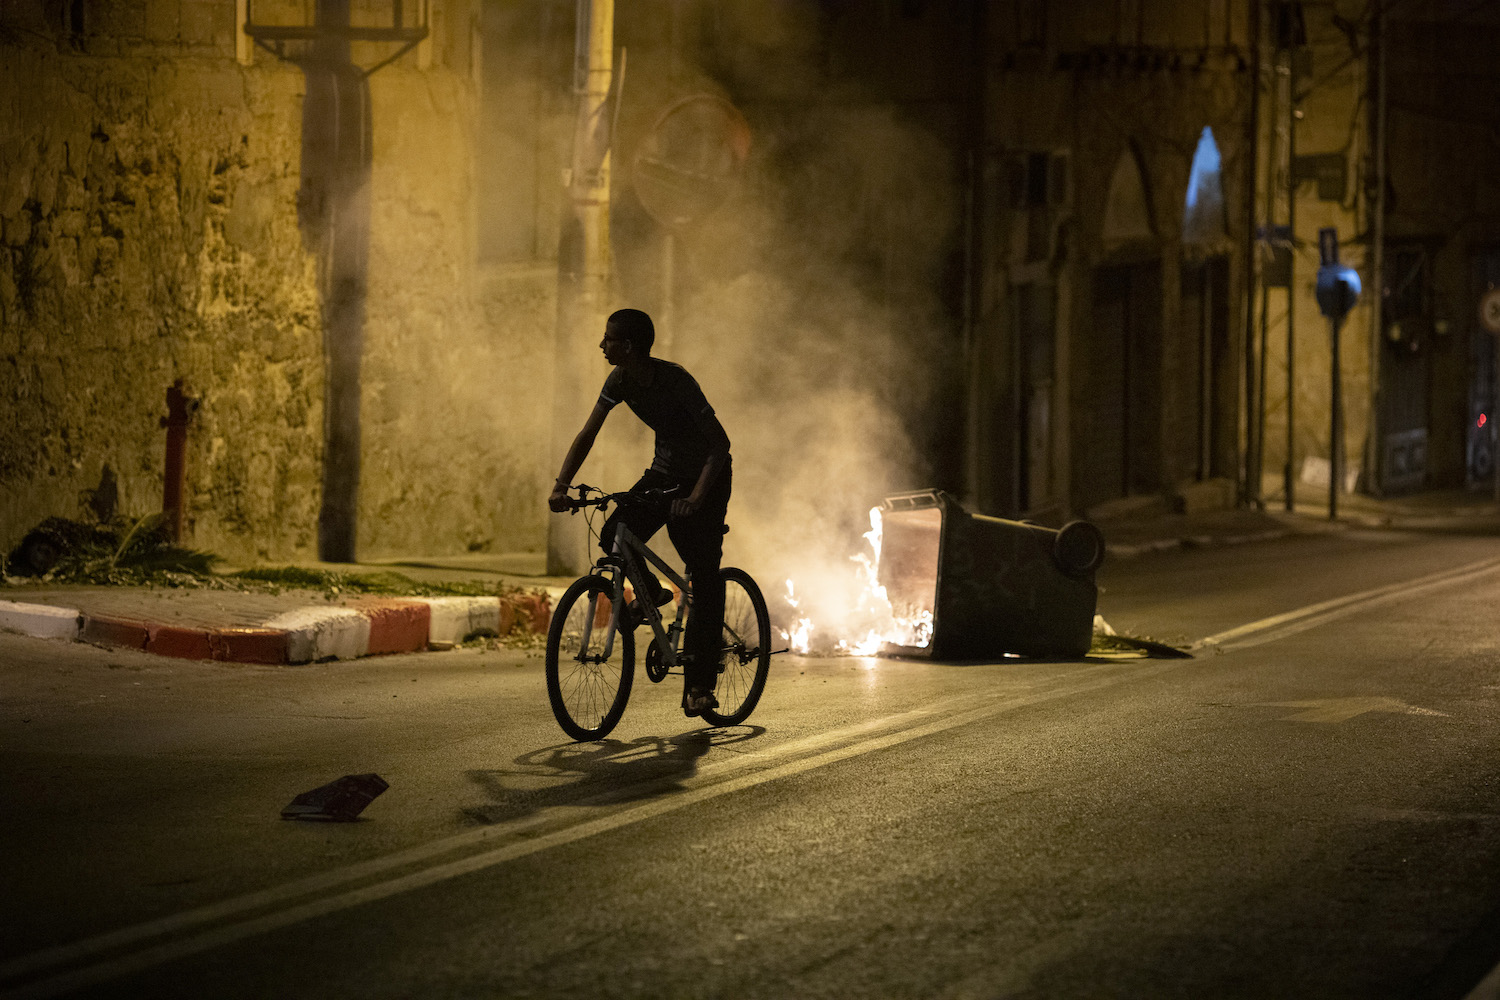 A young Palestinian rides his bike in Jaffa as Israeli police disperse Palestinians protesting against the Tel Aviv municipality's plan to build a homeless shelter and commercial space over an 18th-century Muslim cemetery, July 18, 2020. (Oren Ziv)